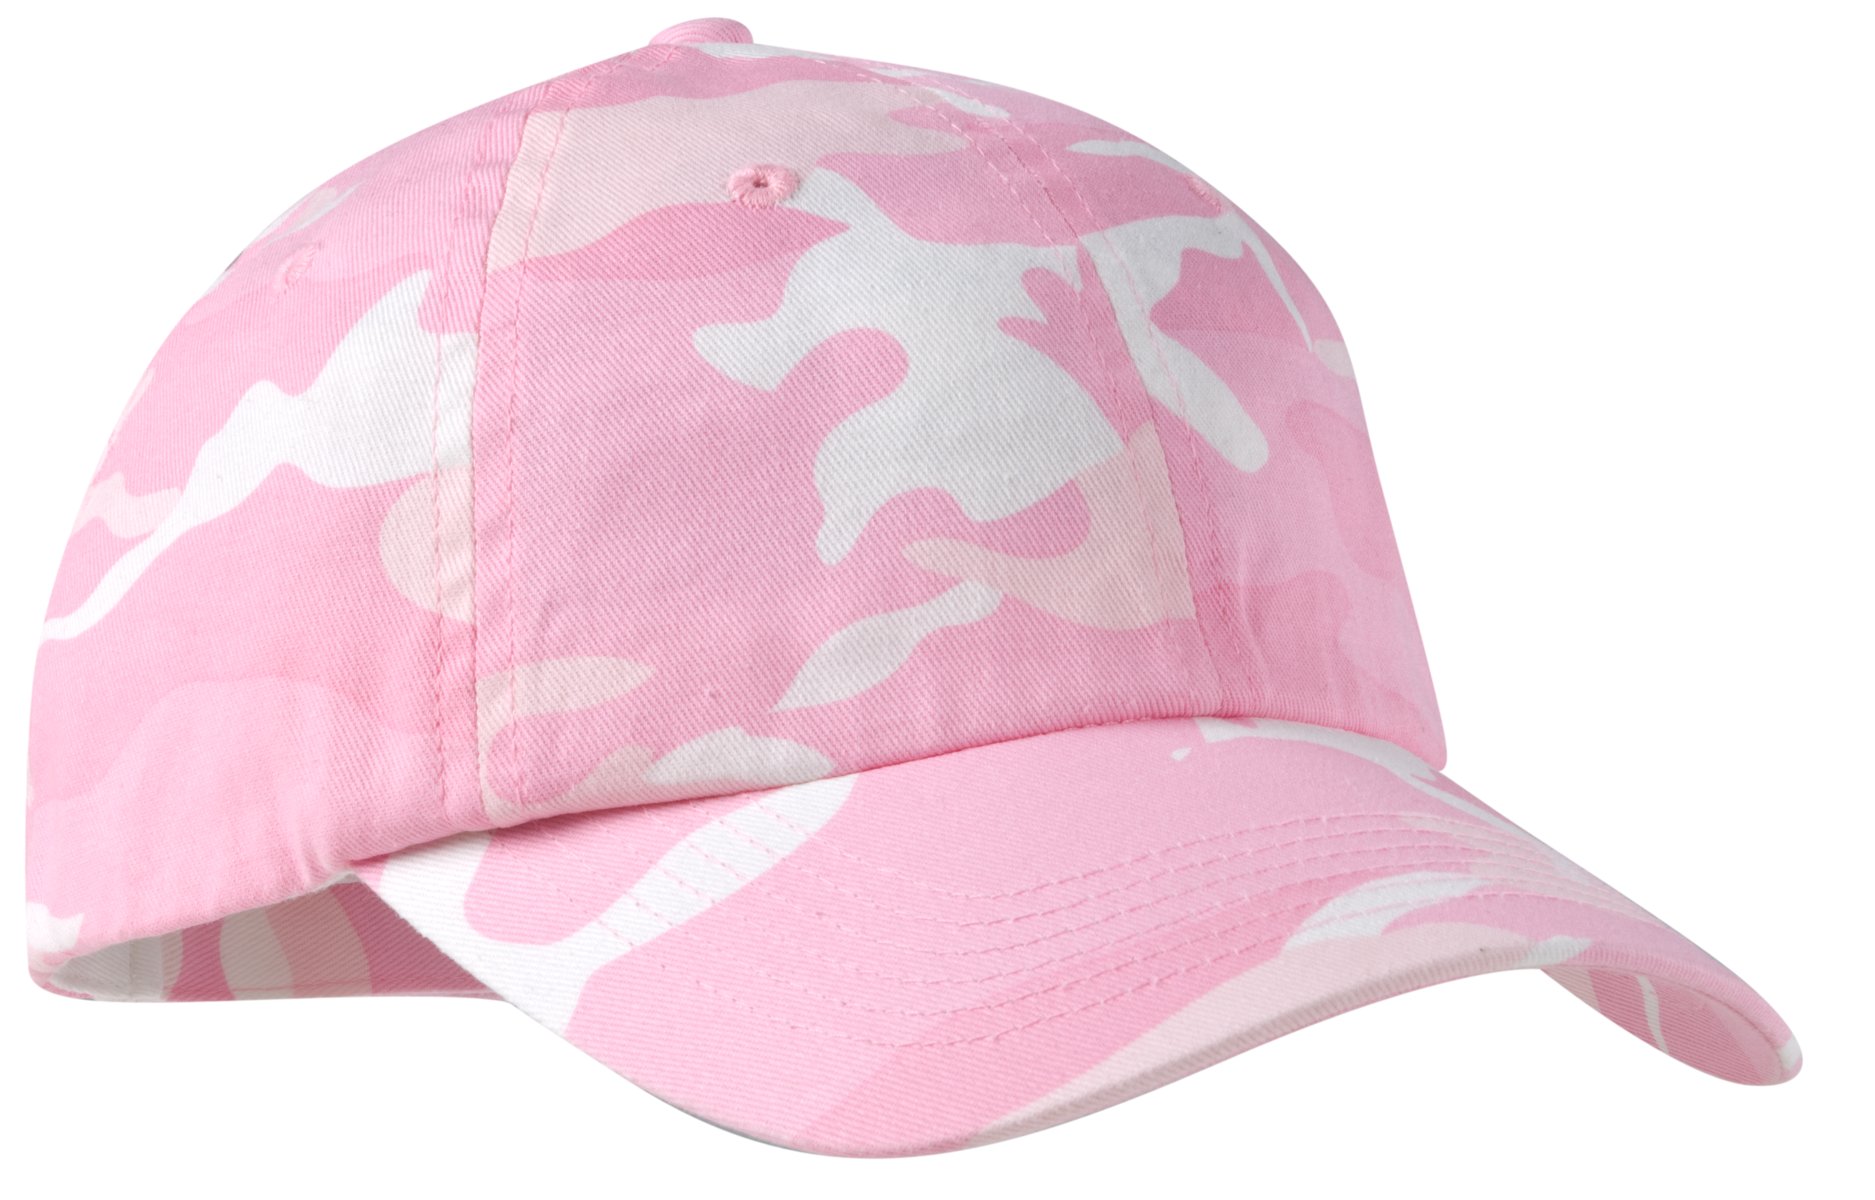 Selected Color is Pink Camo